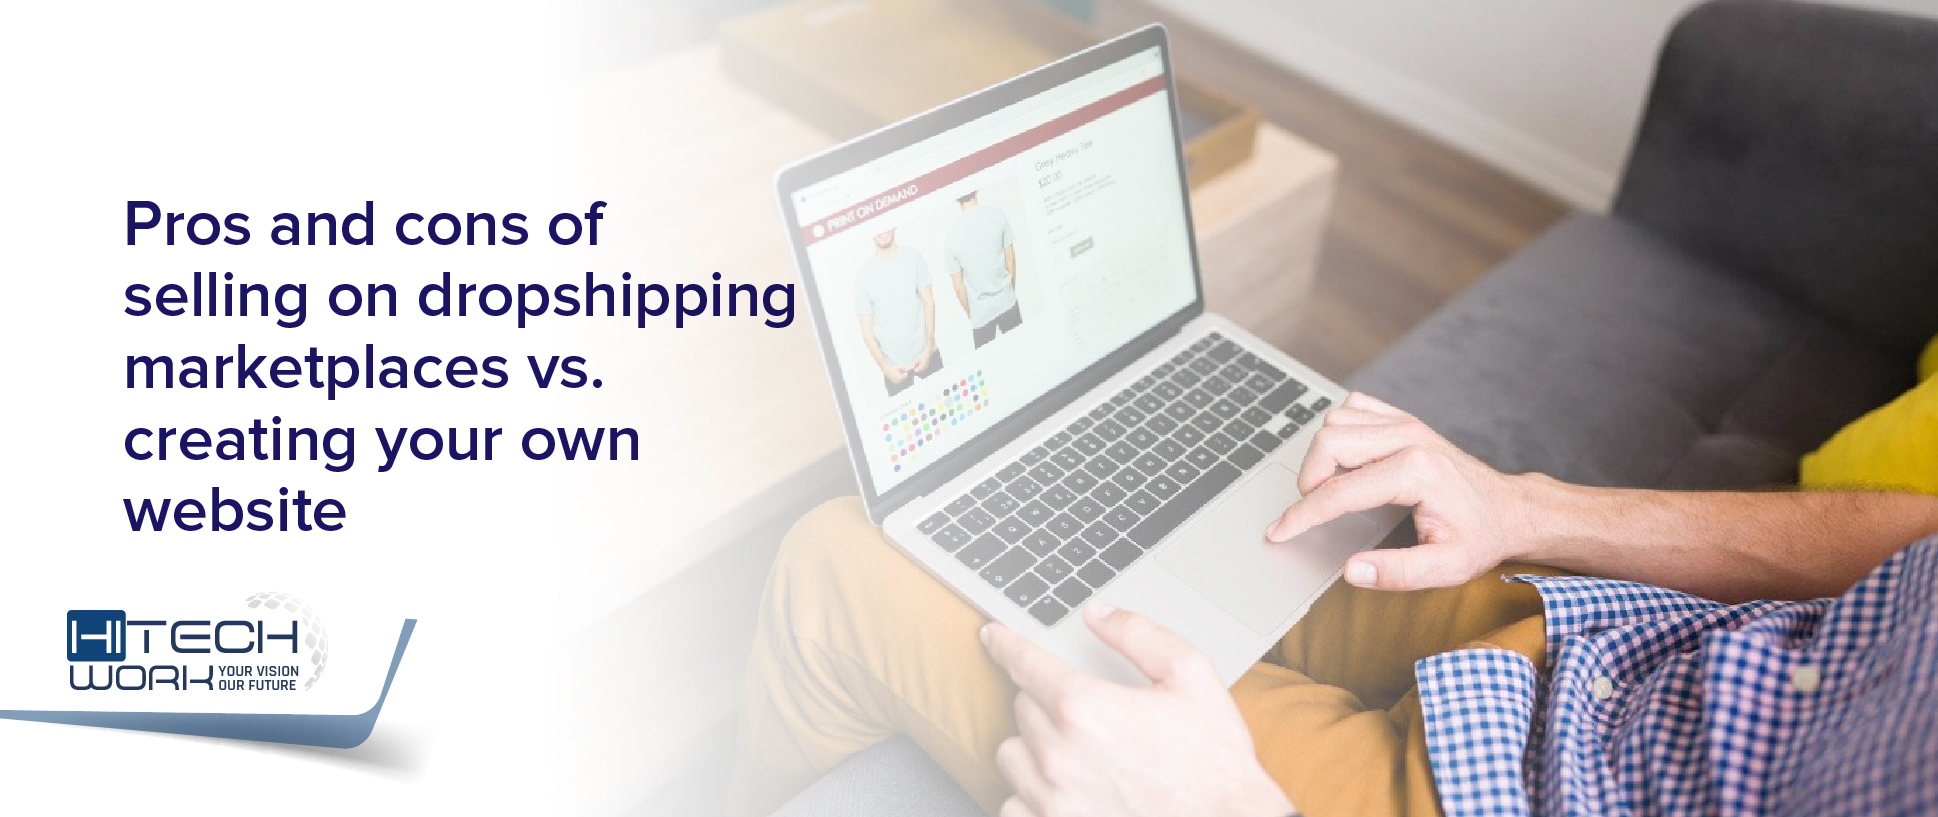 Selling on dropshipping marketplaces vs. creating your own website